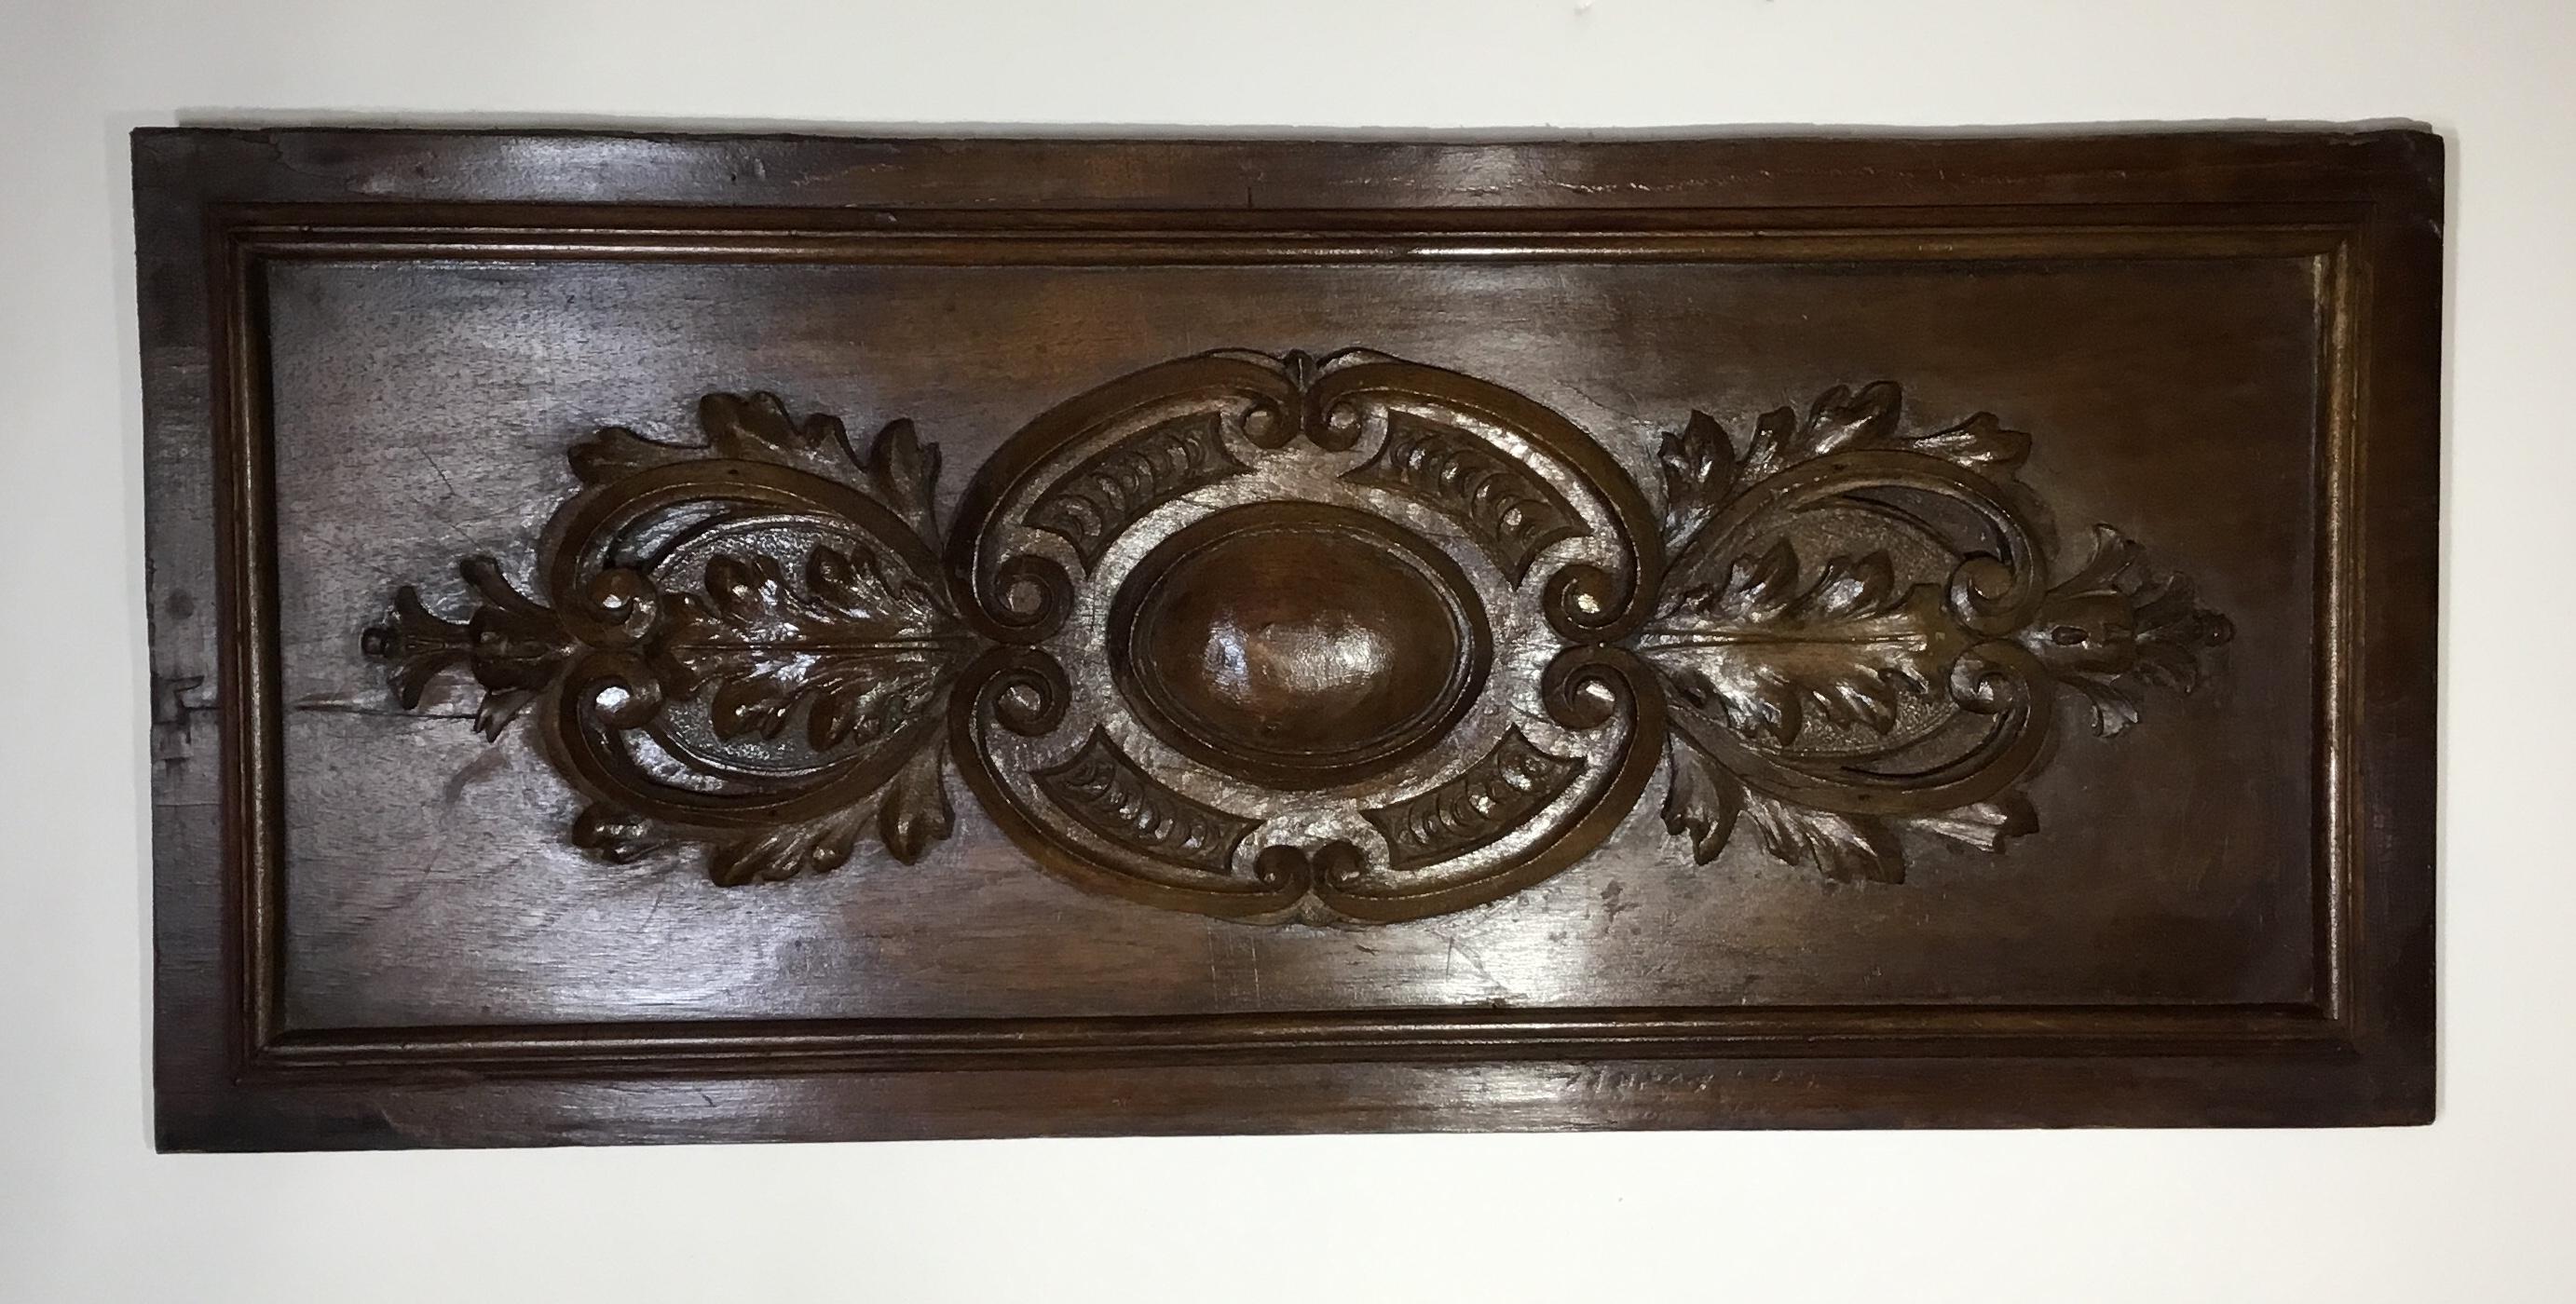 Beautifully hand carved wood wall hanging, French decorative motif 
Very detailed, look great as wall hanging, could use horizontal or vertical.